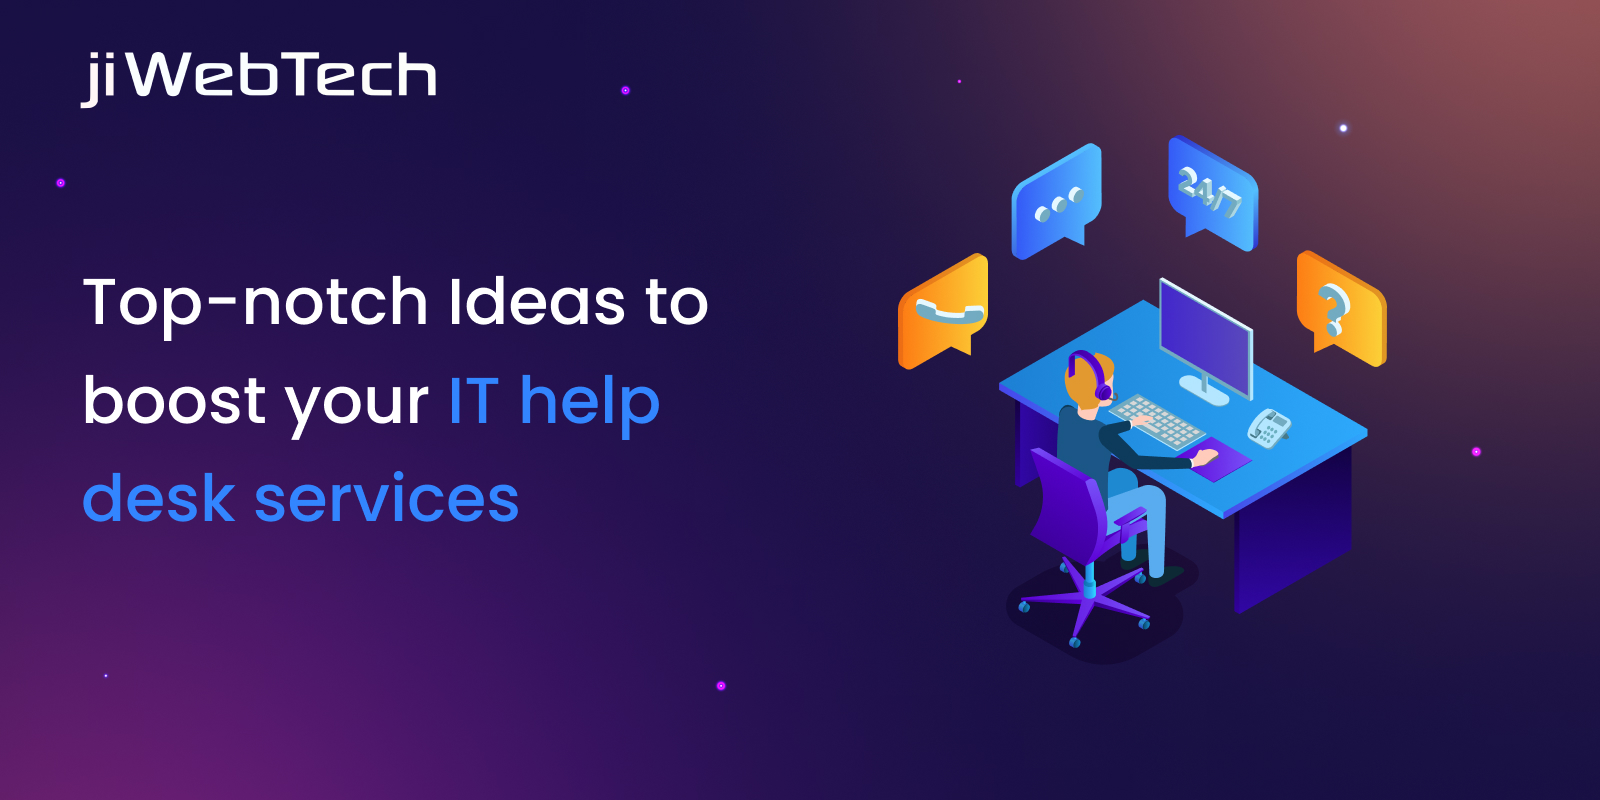 Top-notch Ideas To Boost Your IT Help Desk Services